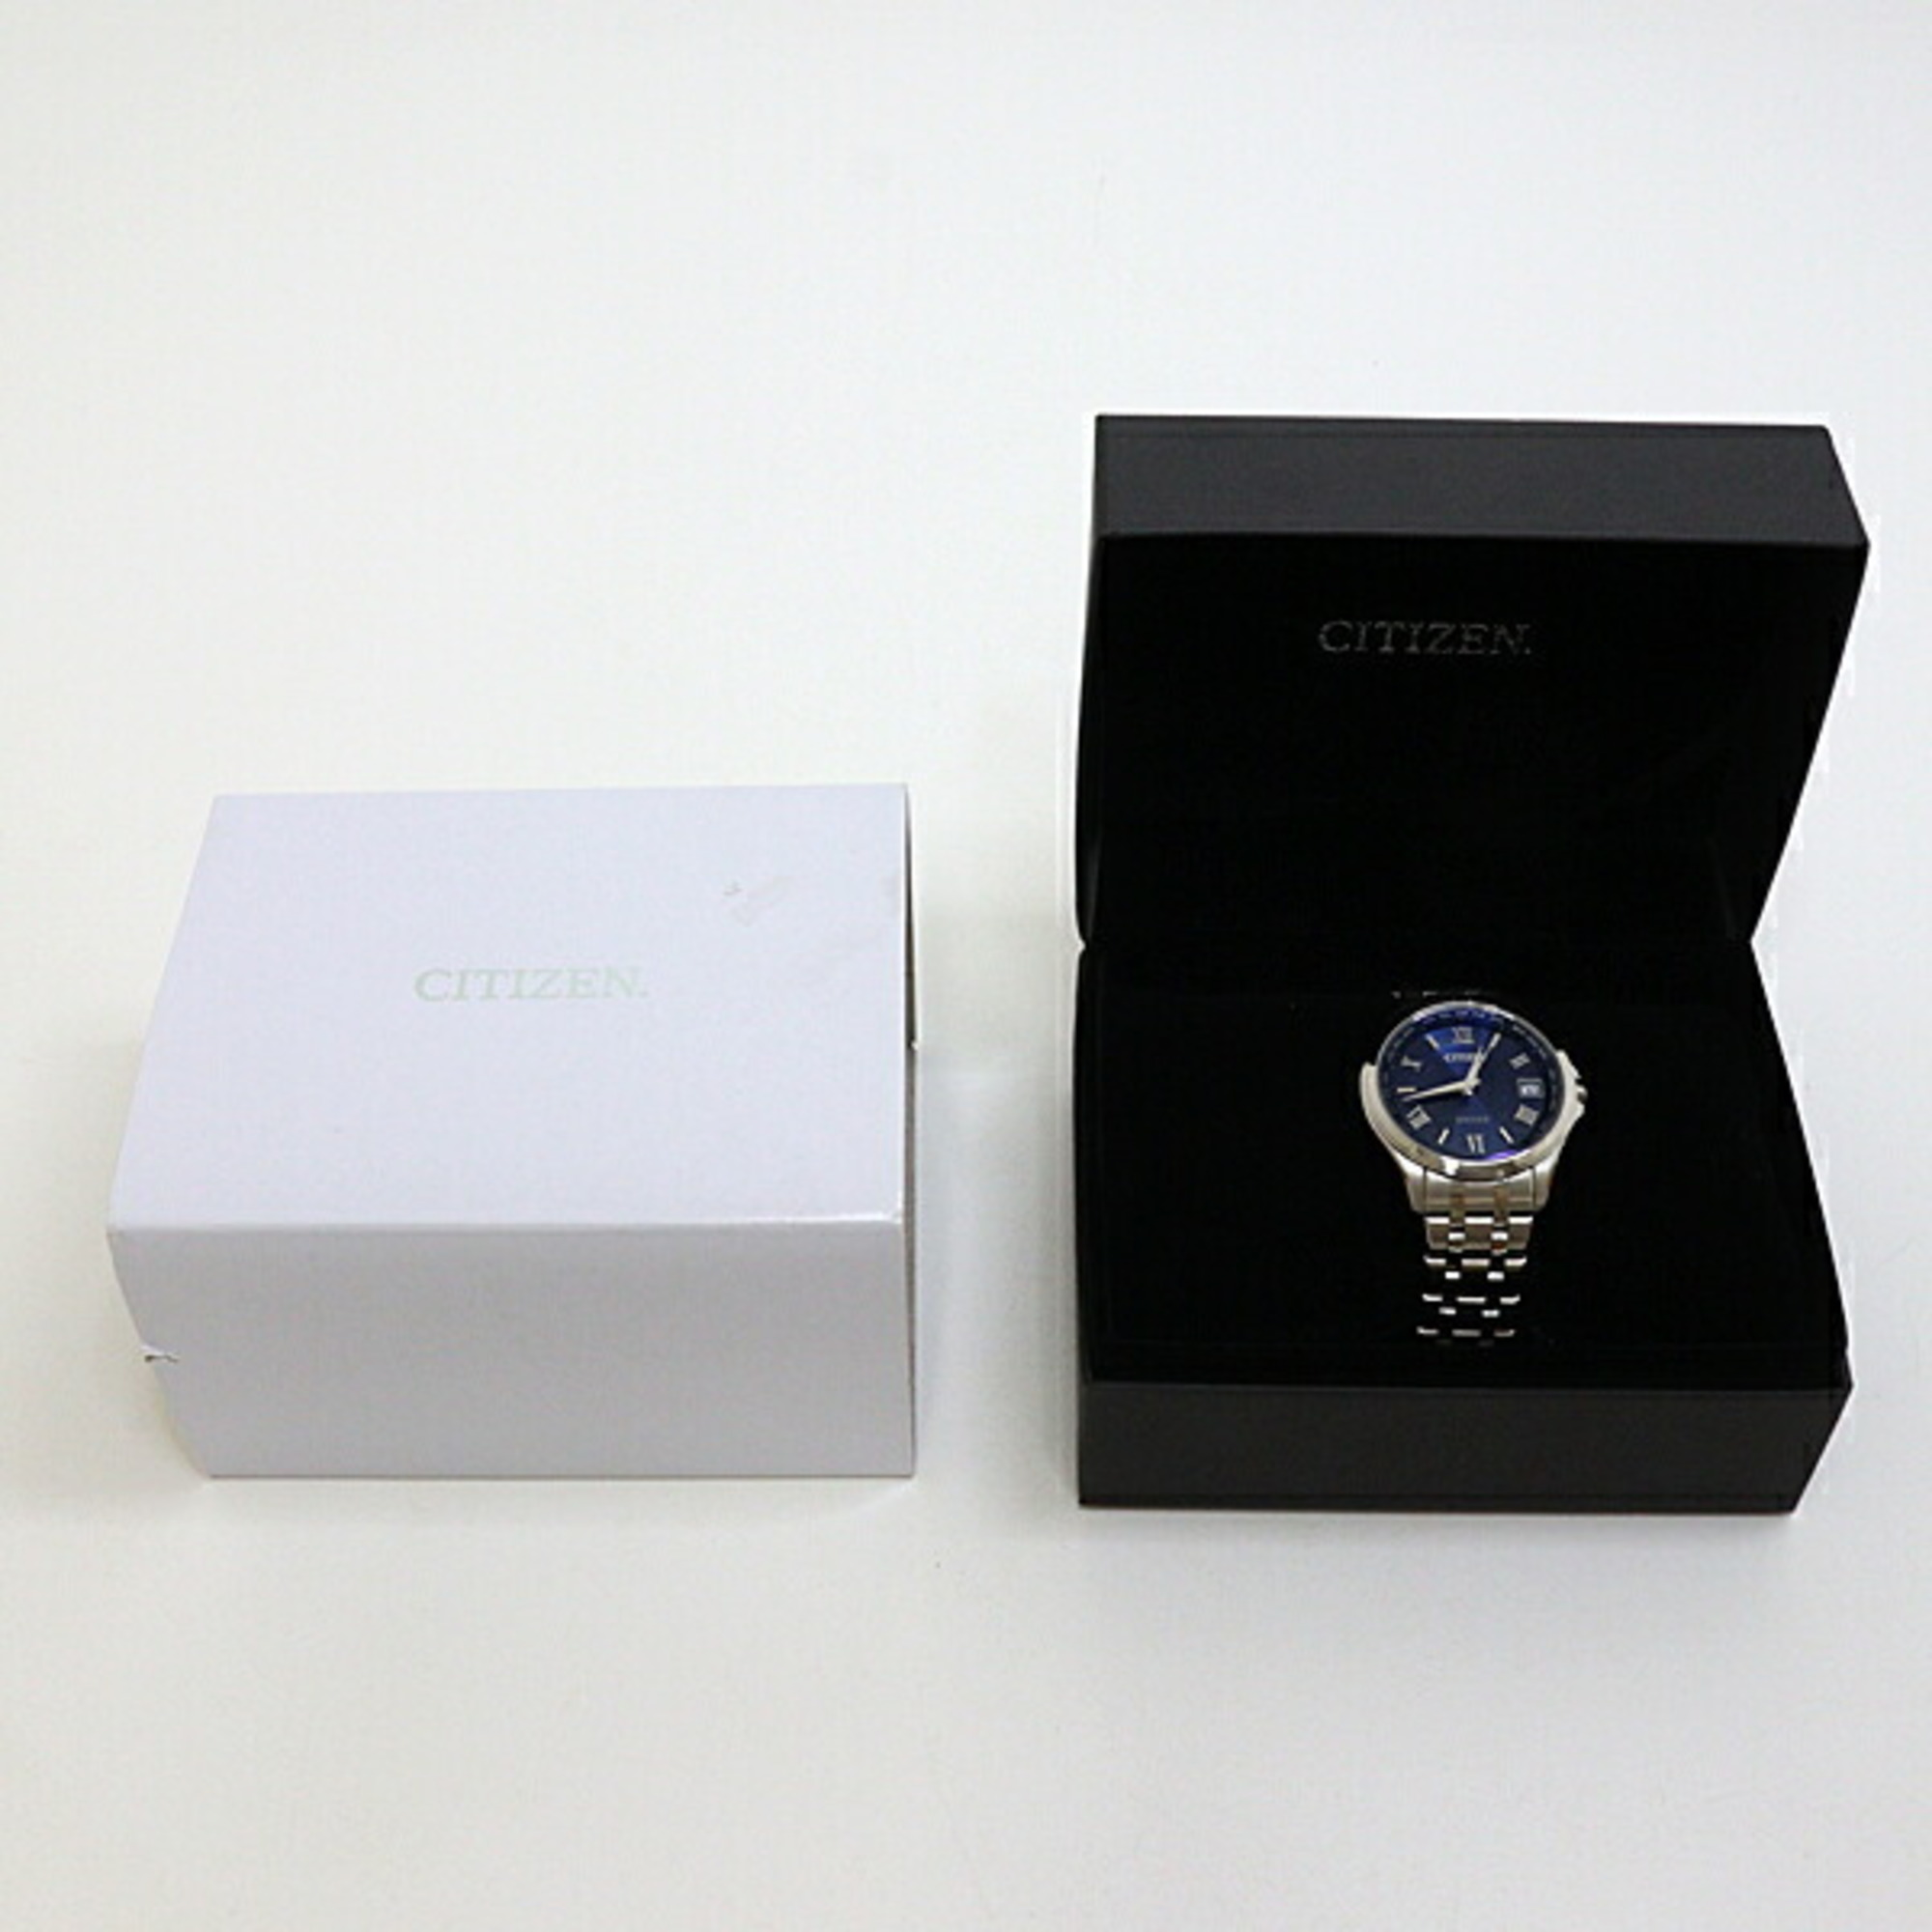 CITIZEN Men's Watch Exceed CB1080-52L Light-Powered Eco-Drive Blue Dial